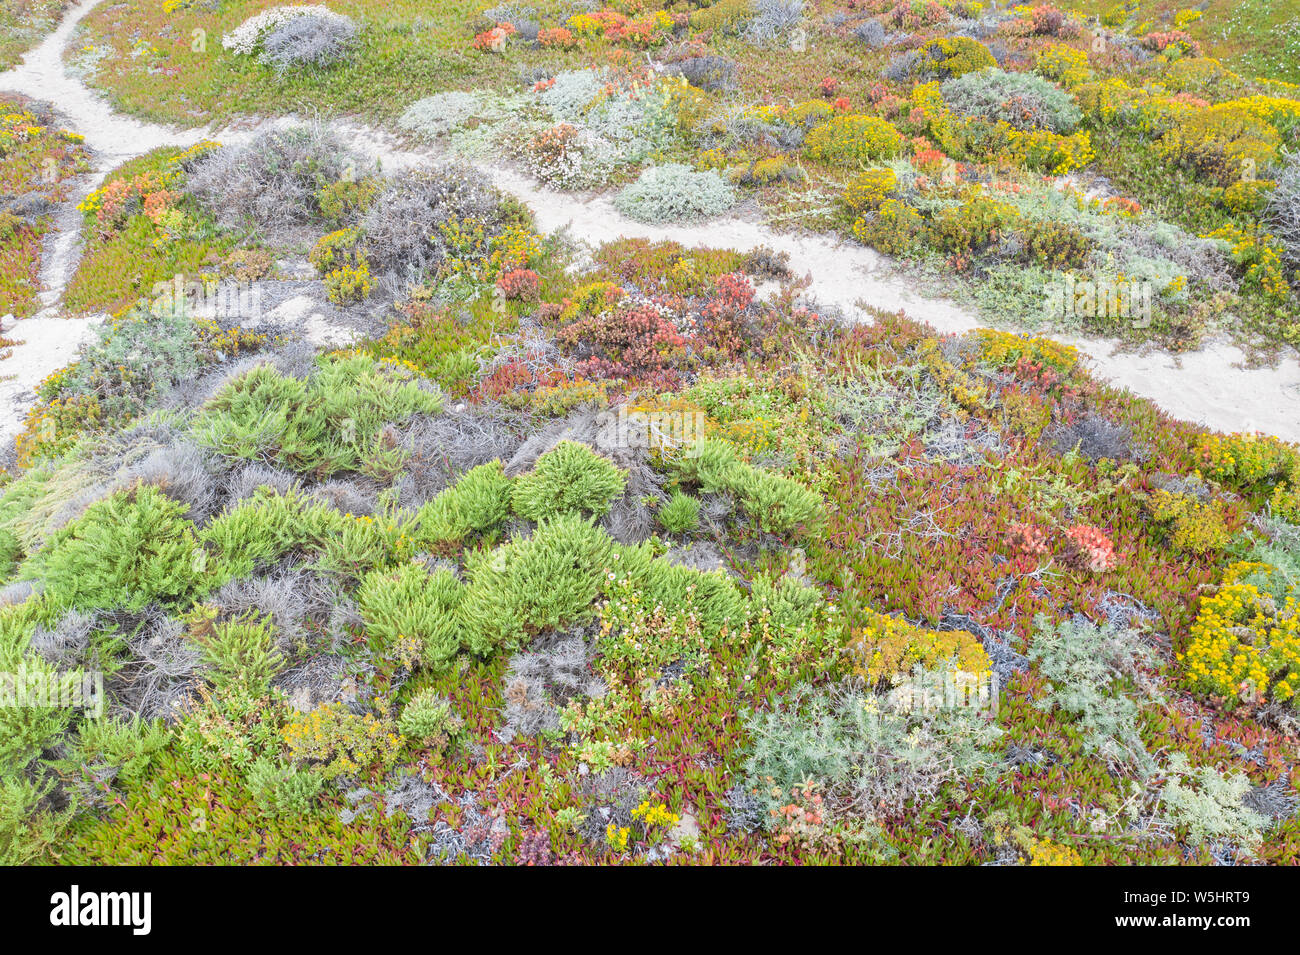 Seen from a bird's eye view, colorful mixed coastal scrub thrives on coastal bluffs near a popular beach south of Monterey in Northern California. Stock Photo